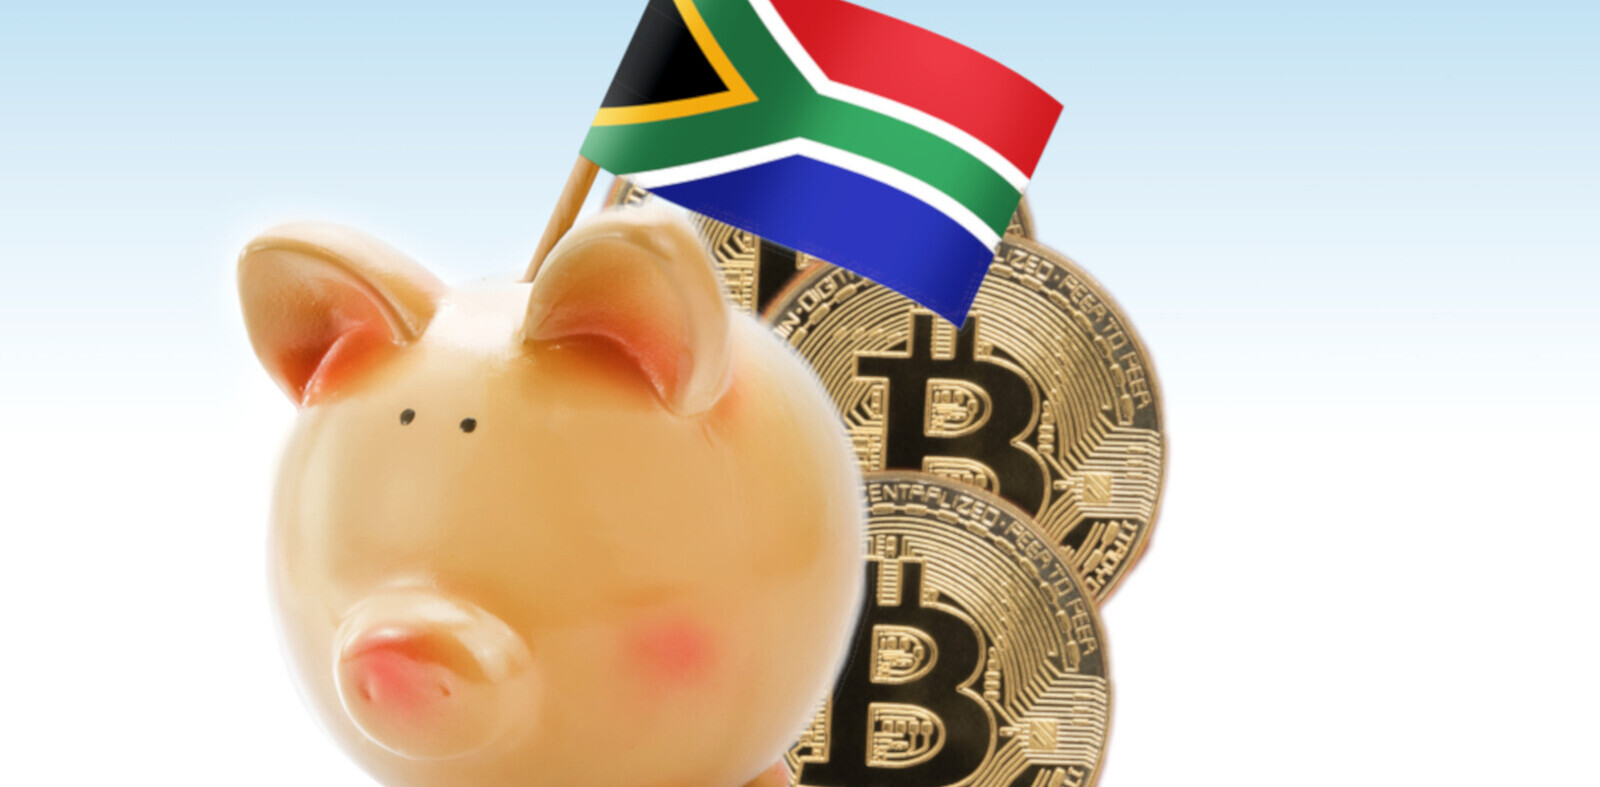 South Africa’s central bank is setting up new rules for cryptocurrency